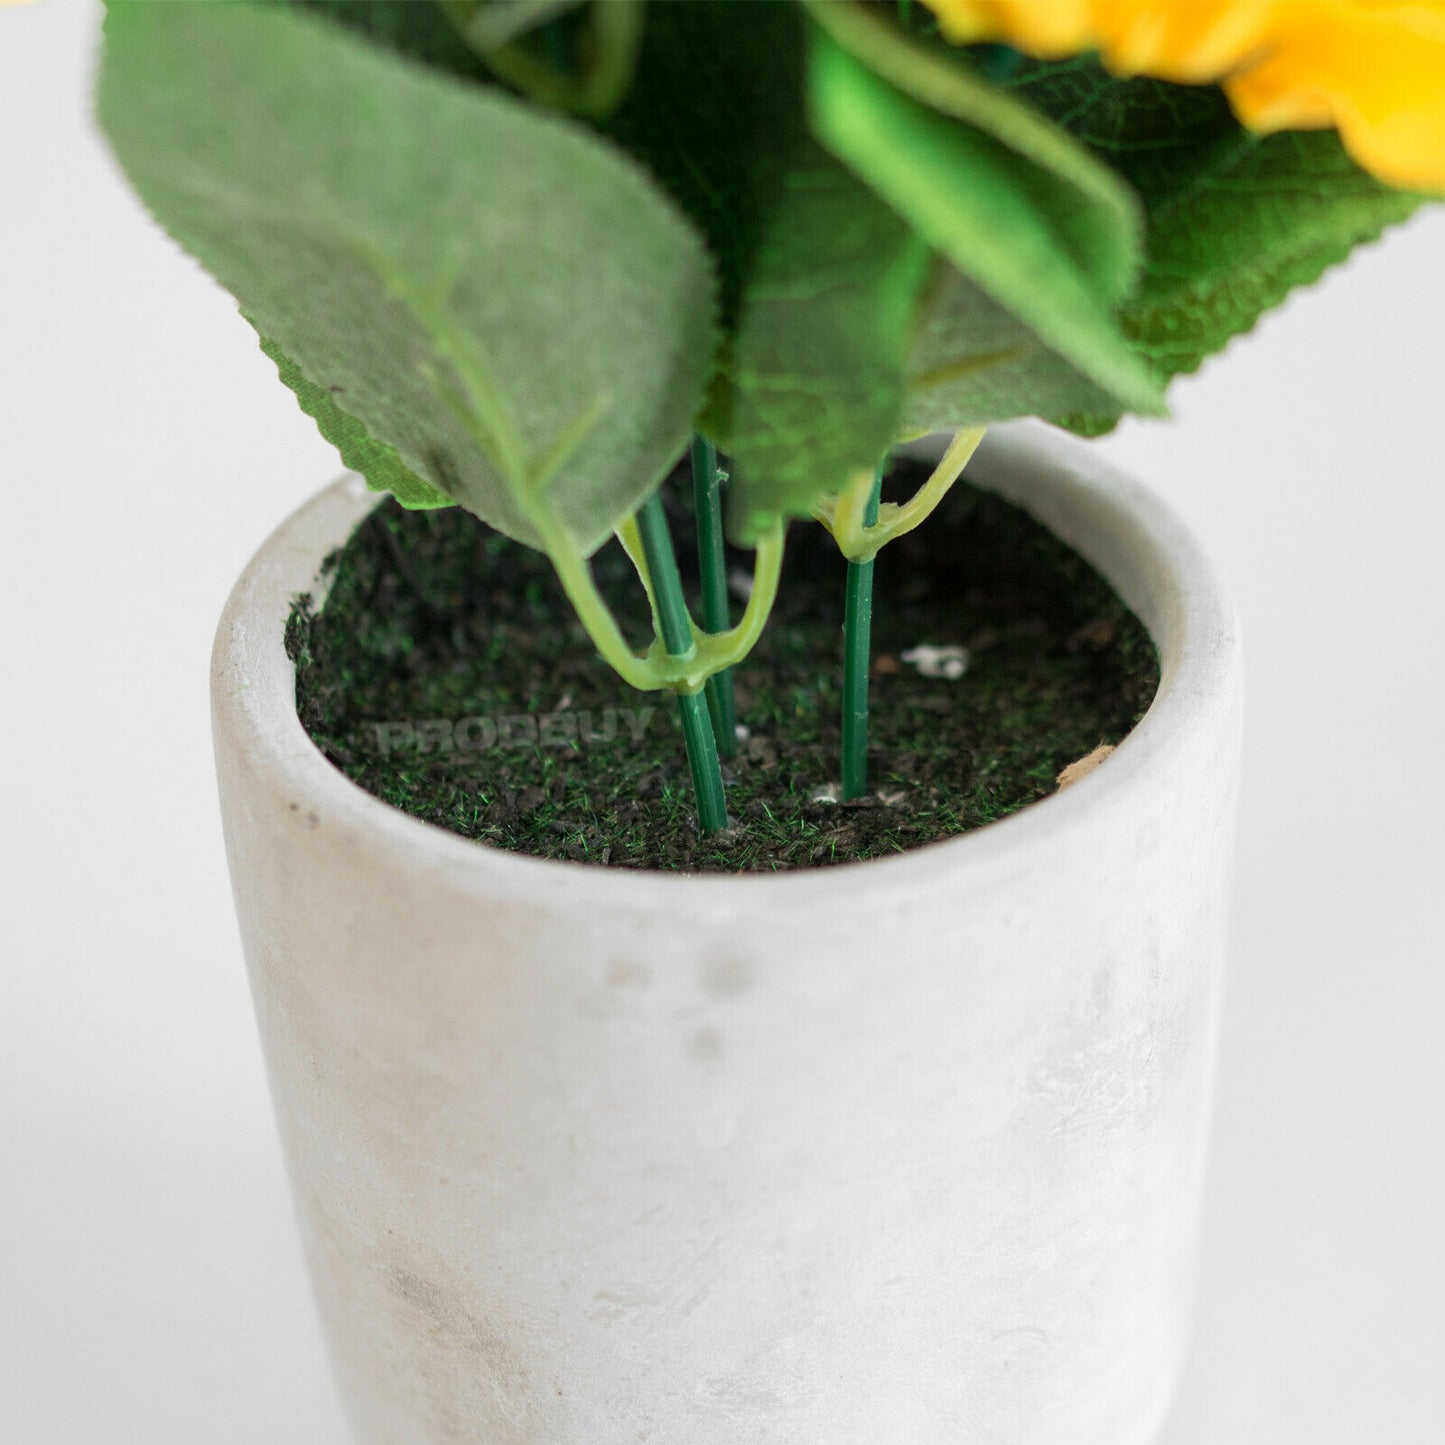 Small Artificial Sunflowers In Pot Ornament